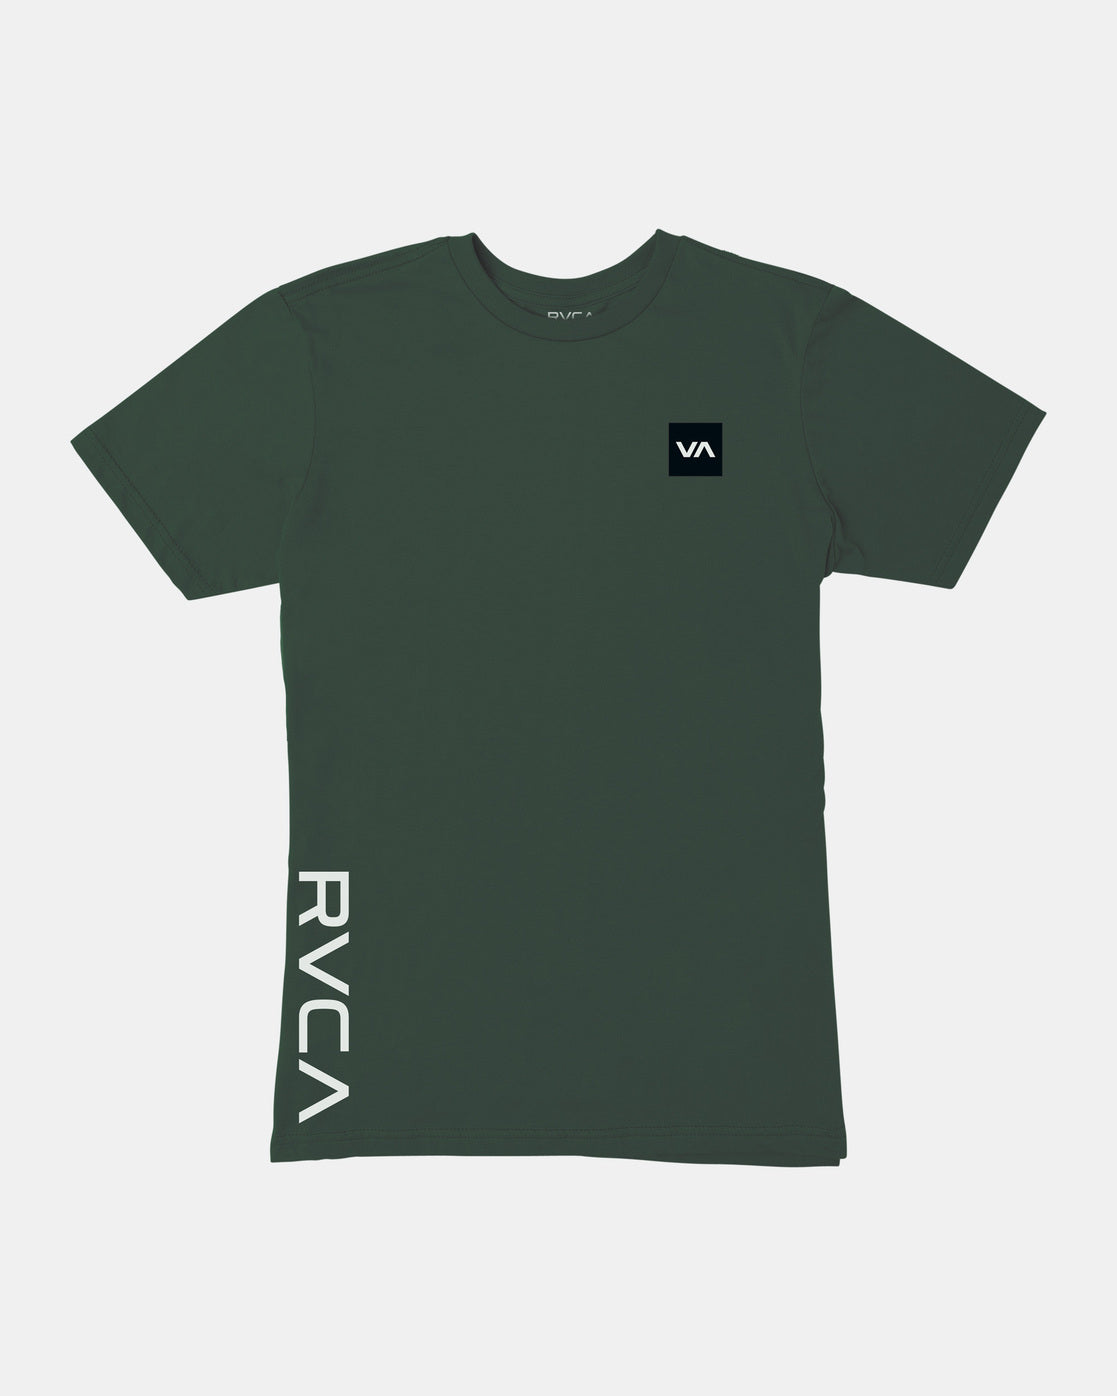  RVCA Mens Sport Drirelease Regular Fit Athletic Breathable Tee  Shirt - RVCA 2X (Blue Tack, Small) : Clothing, Shoes & Jewelry